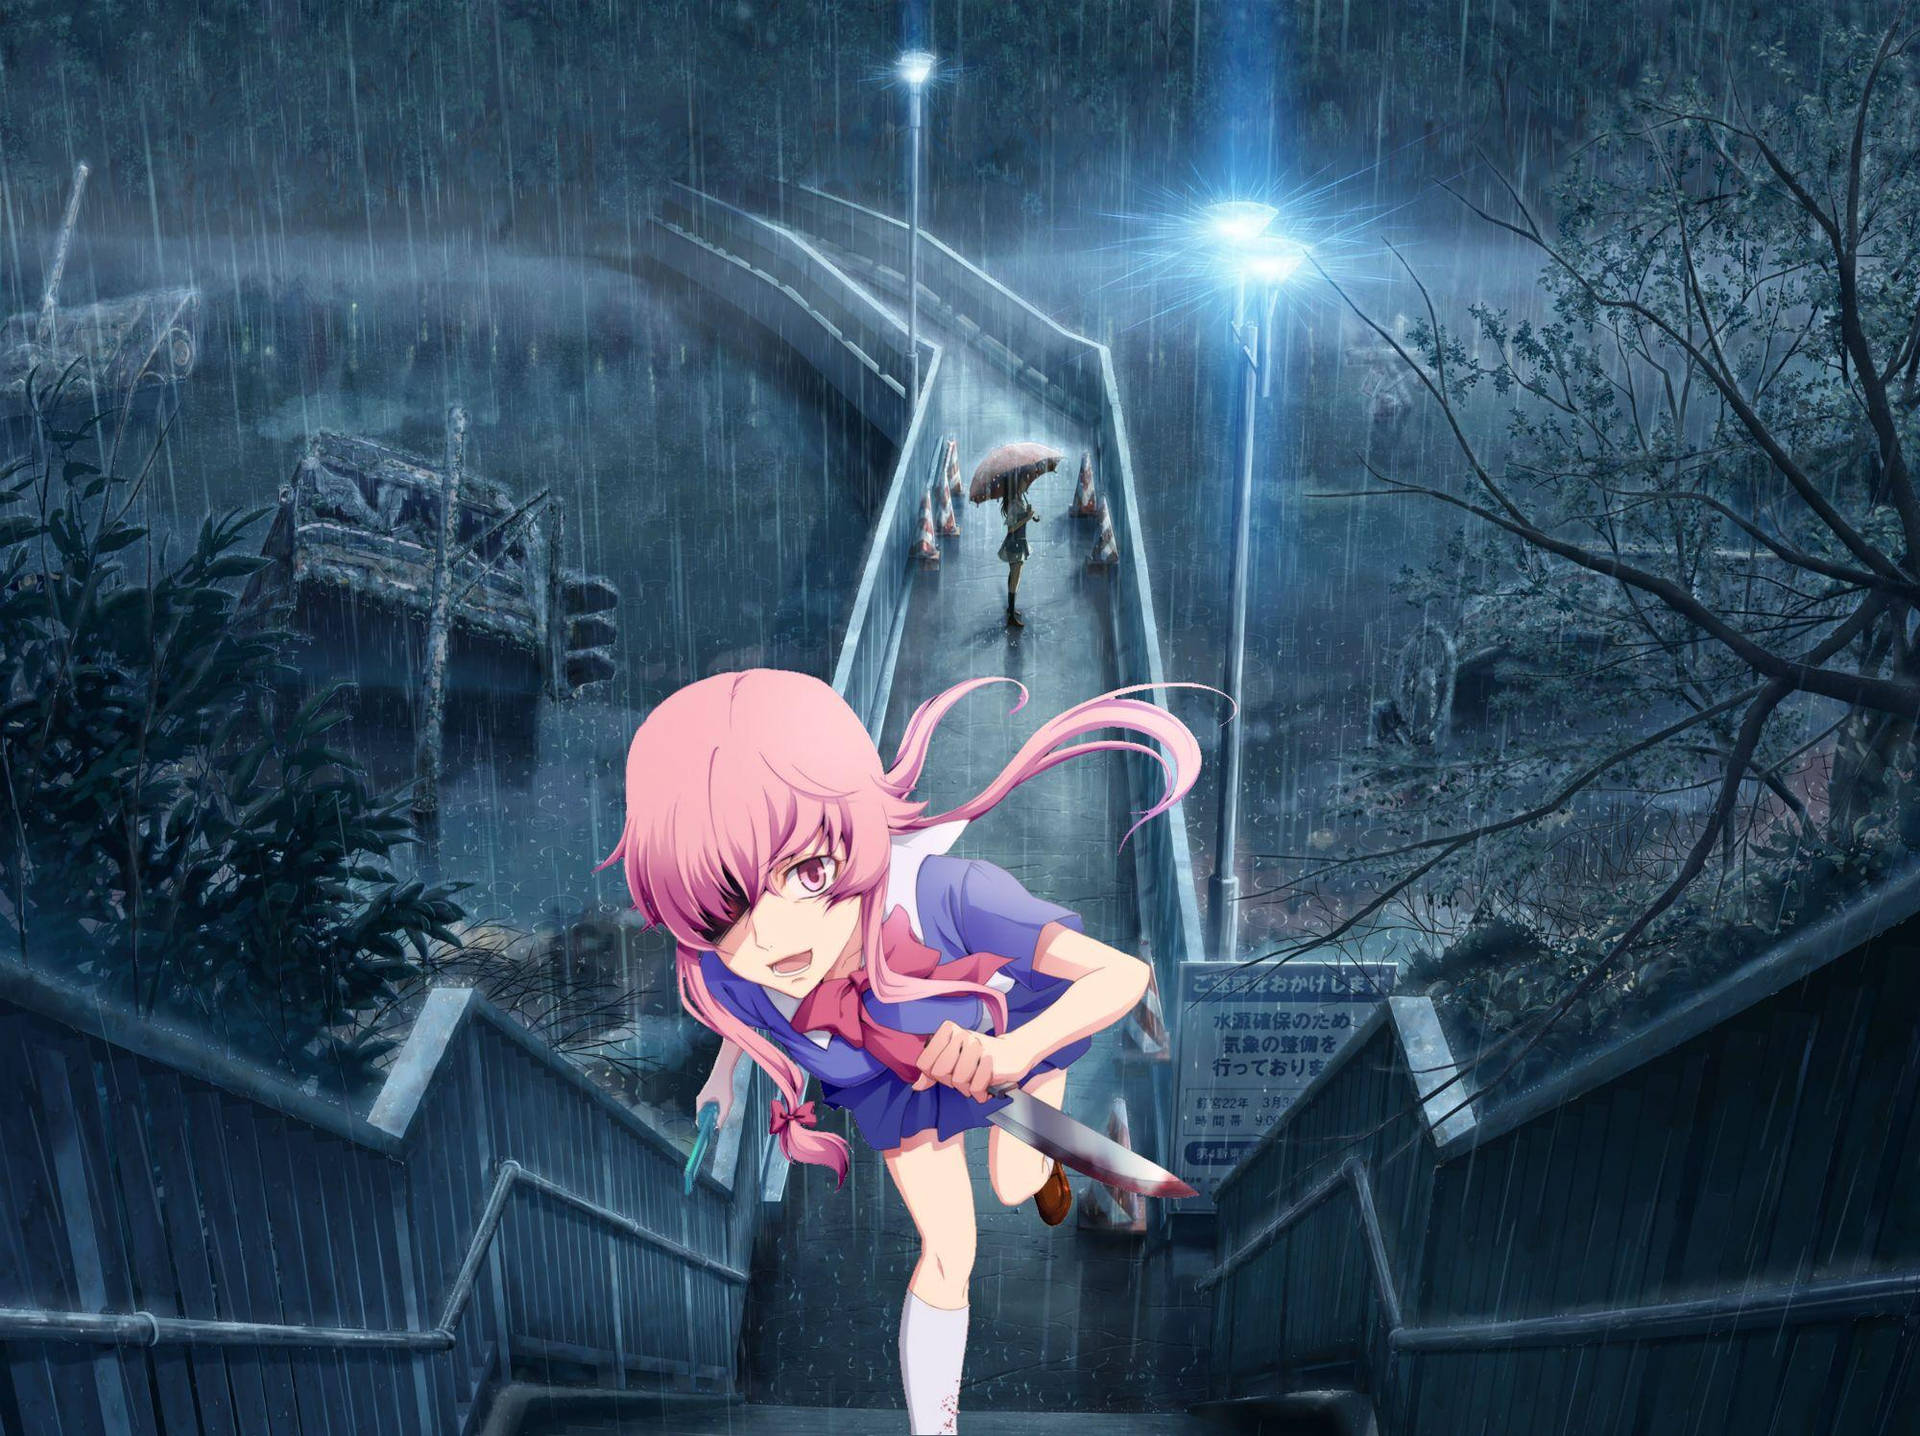 Caption: Yuno Gasai From Future Diary - Intensity Captured In One Image